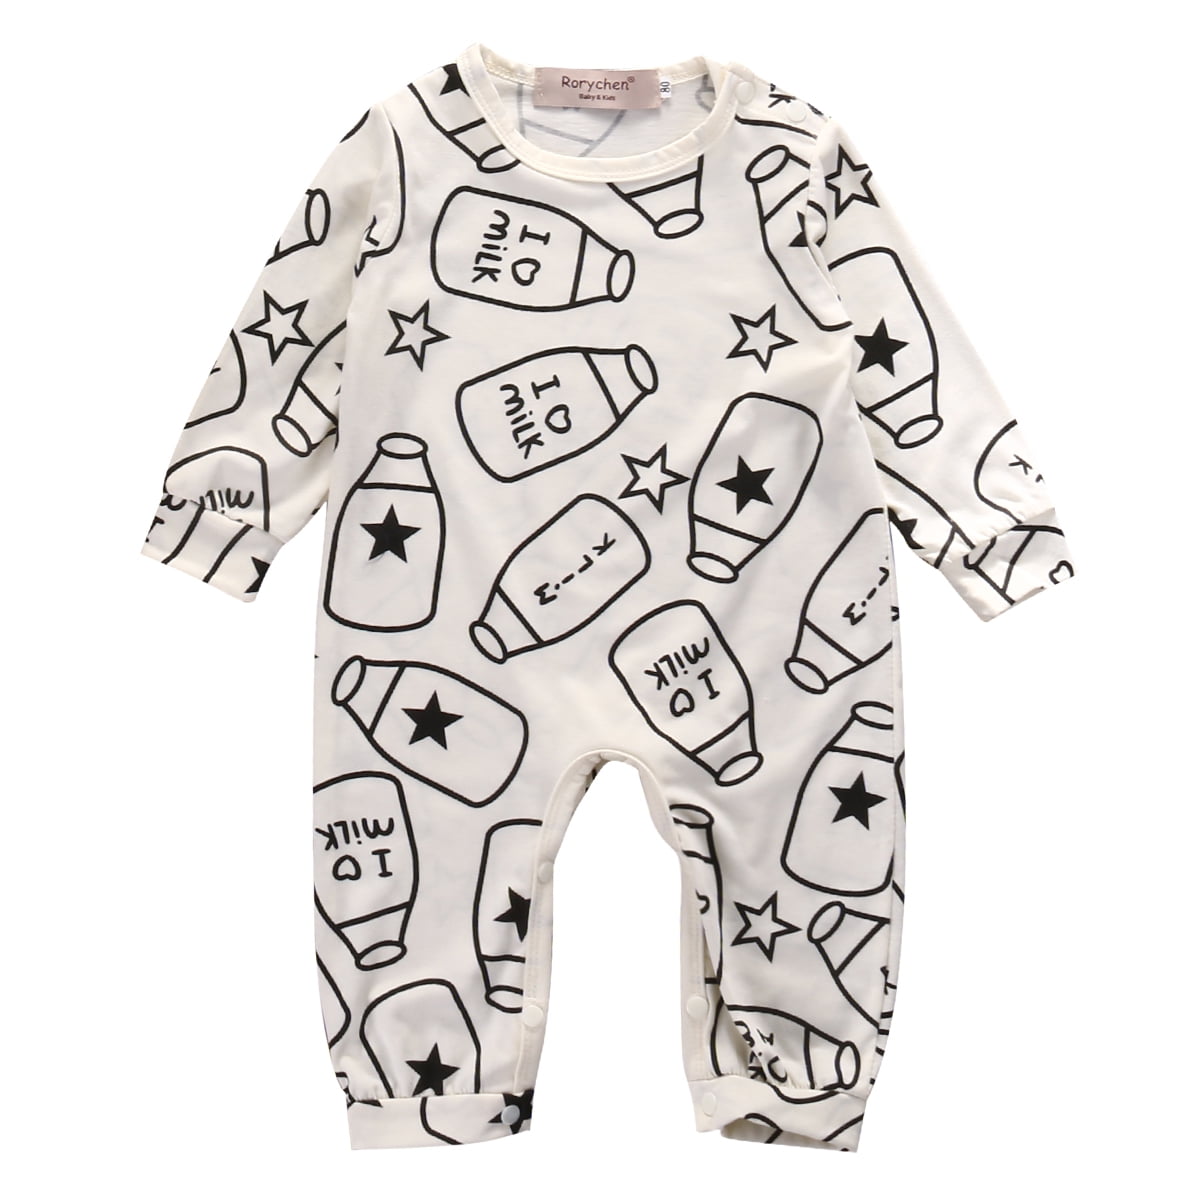 Baby Rompers Cotton Onsises Boys Girls Long Sleeve Sleepsuit Coveralls Cartoon Outfits